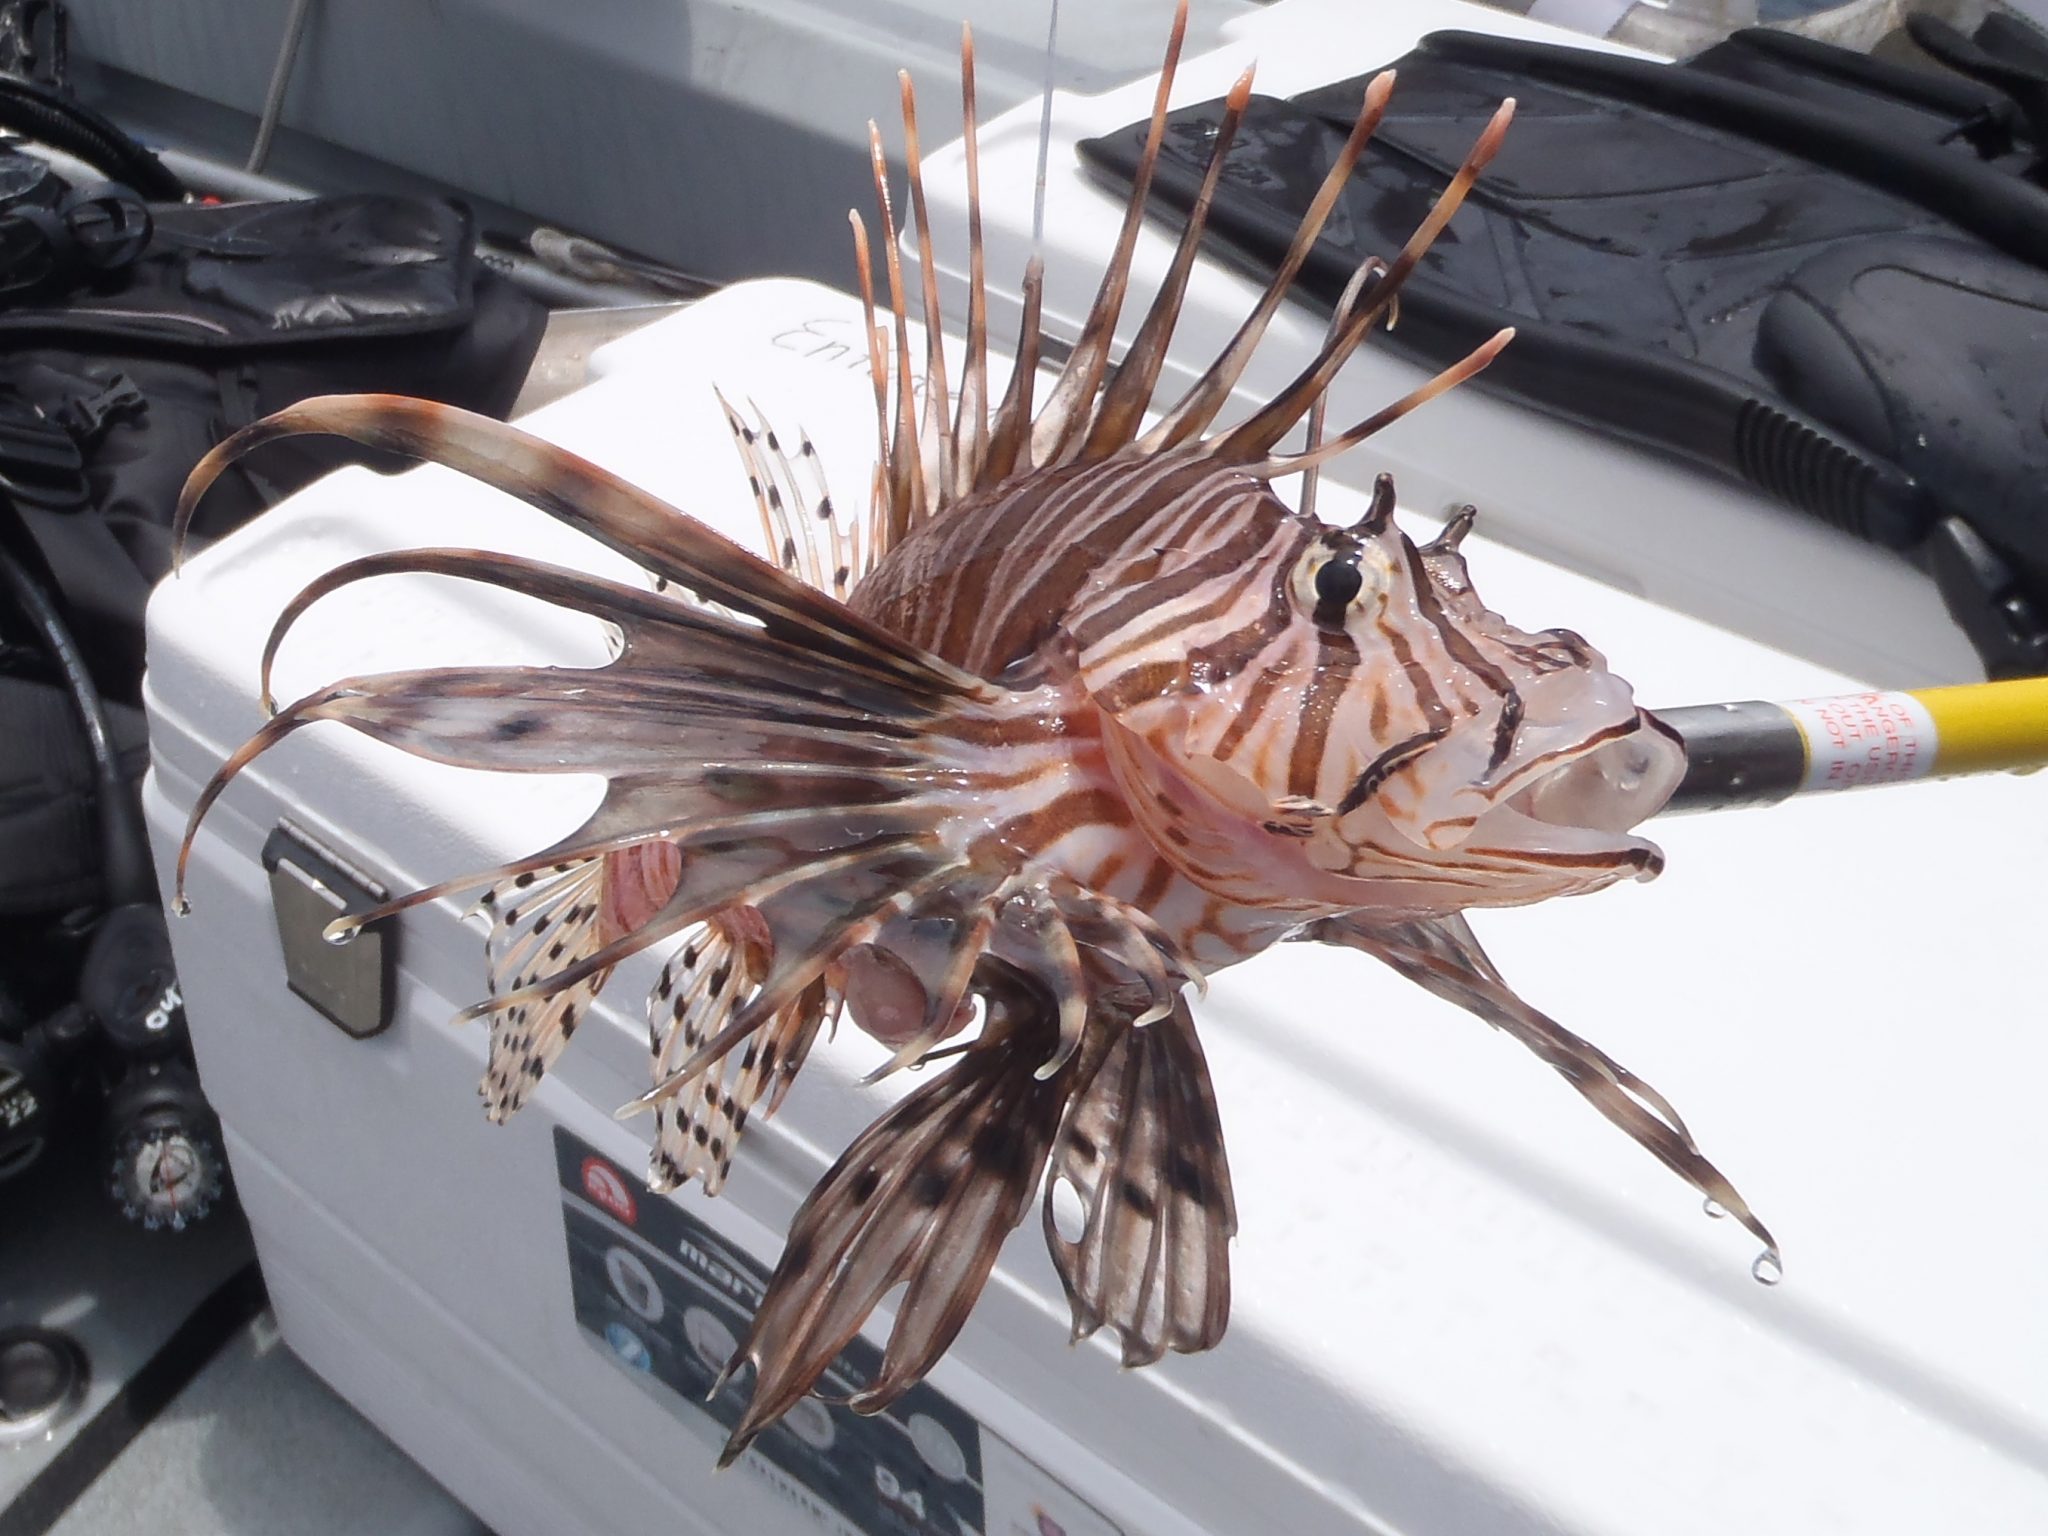 A venomous lionfish captured in Alabama waters